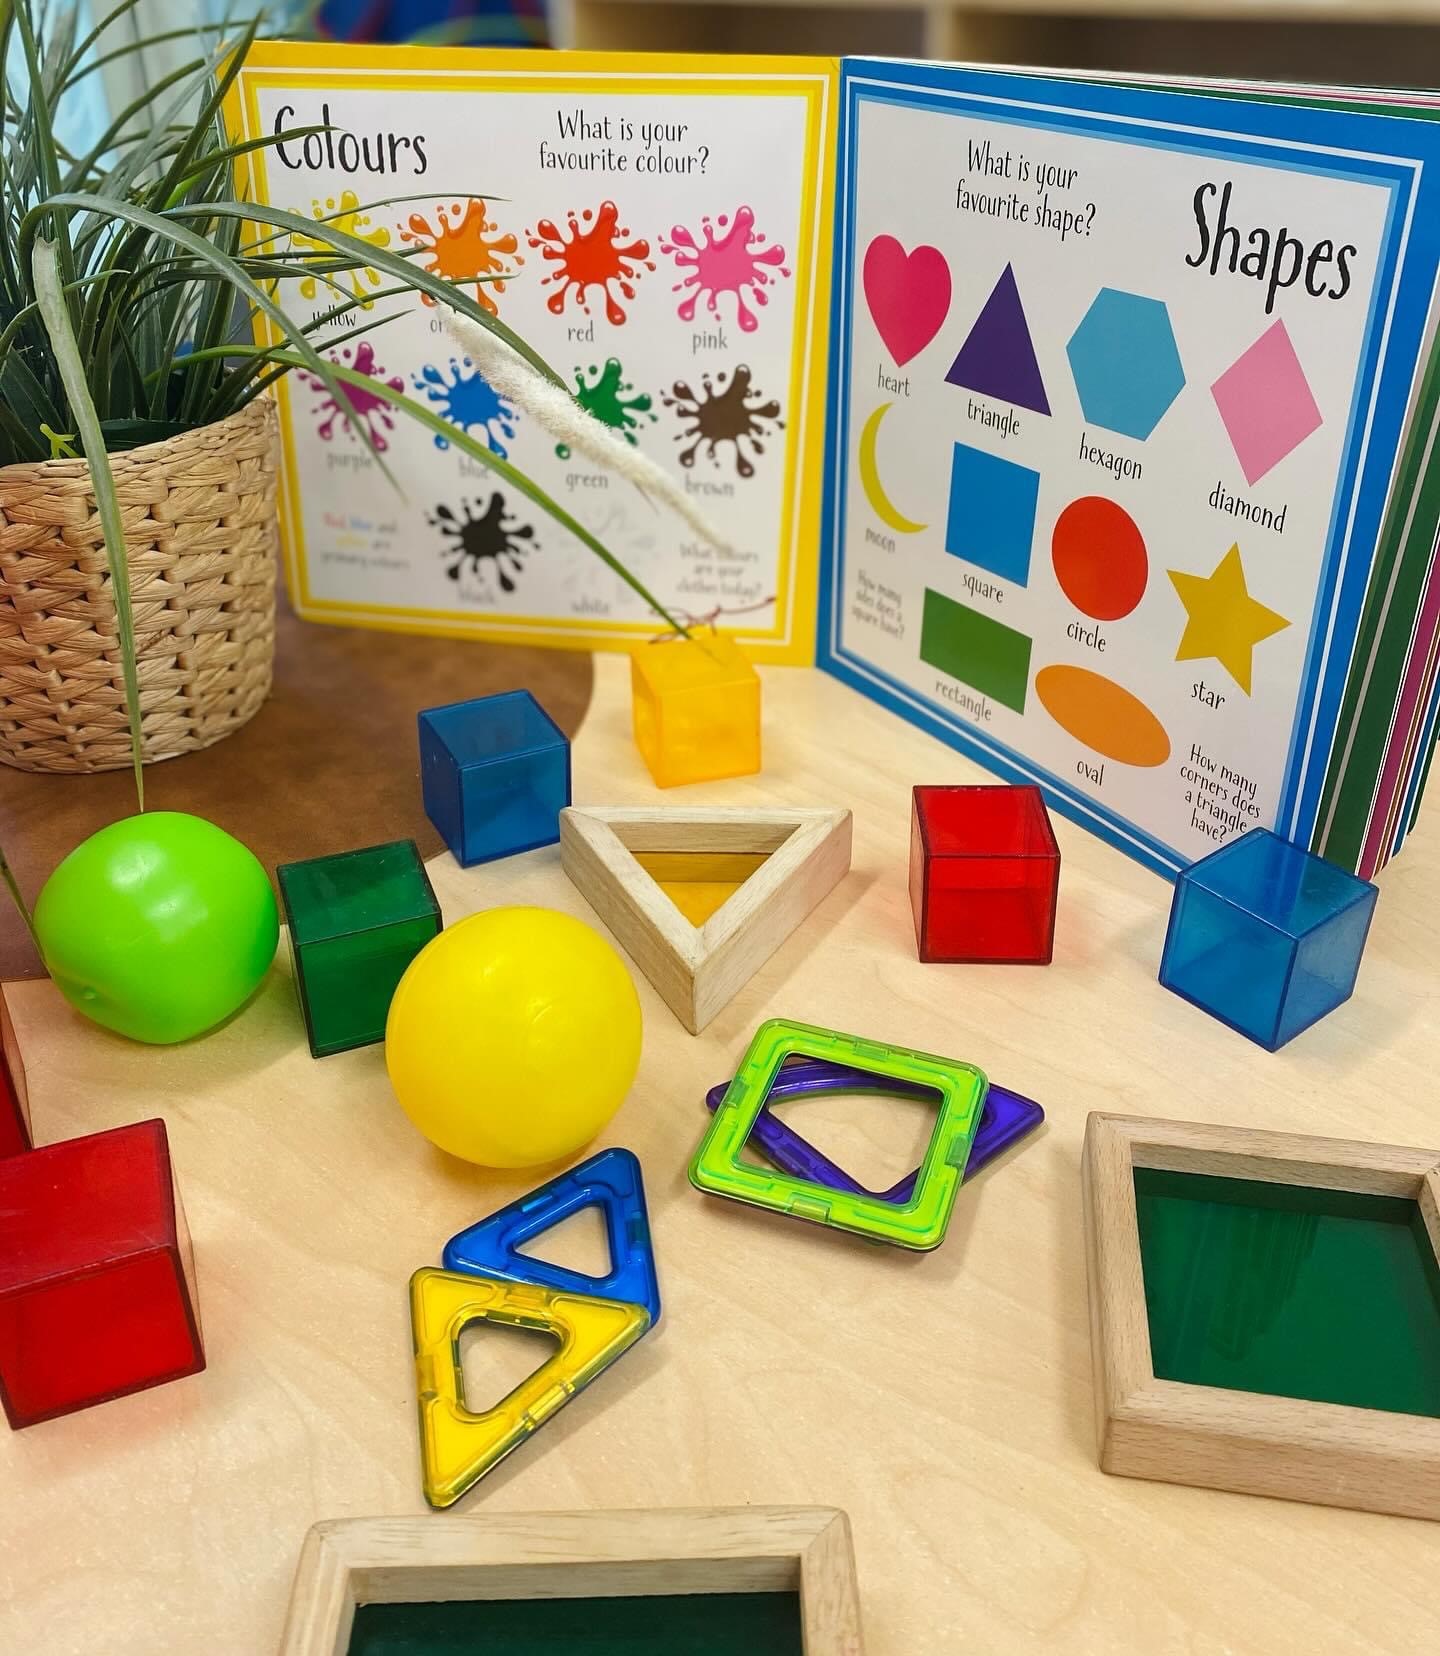 Preschool classroom with play-based learning activities